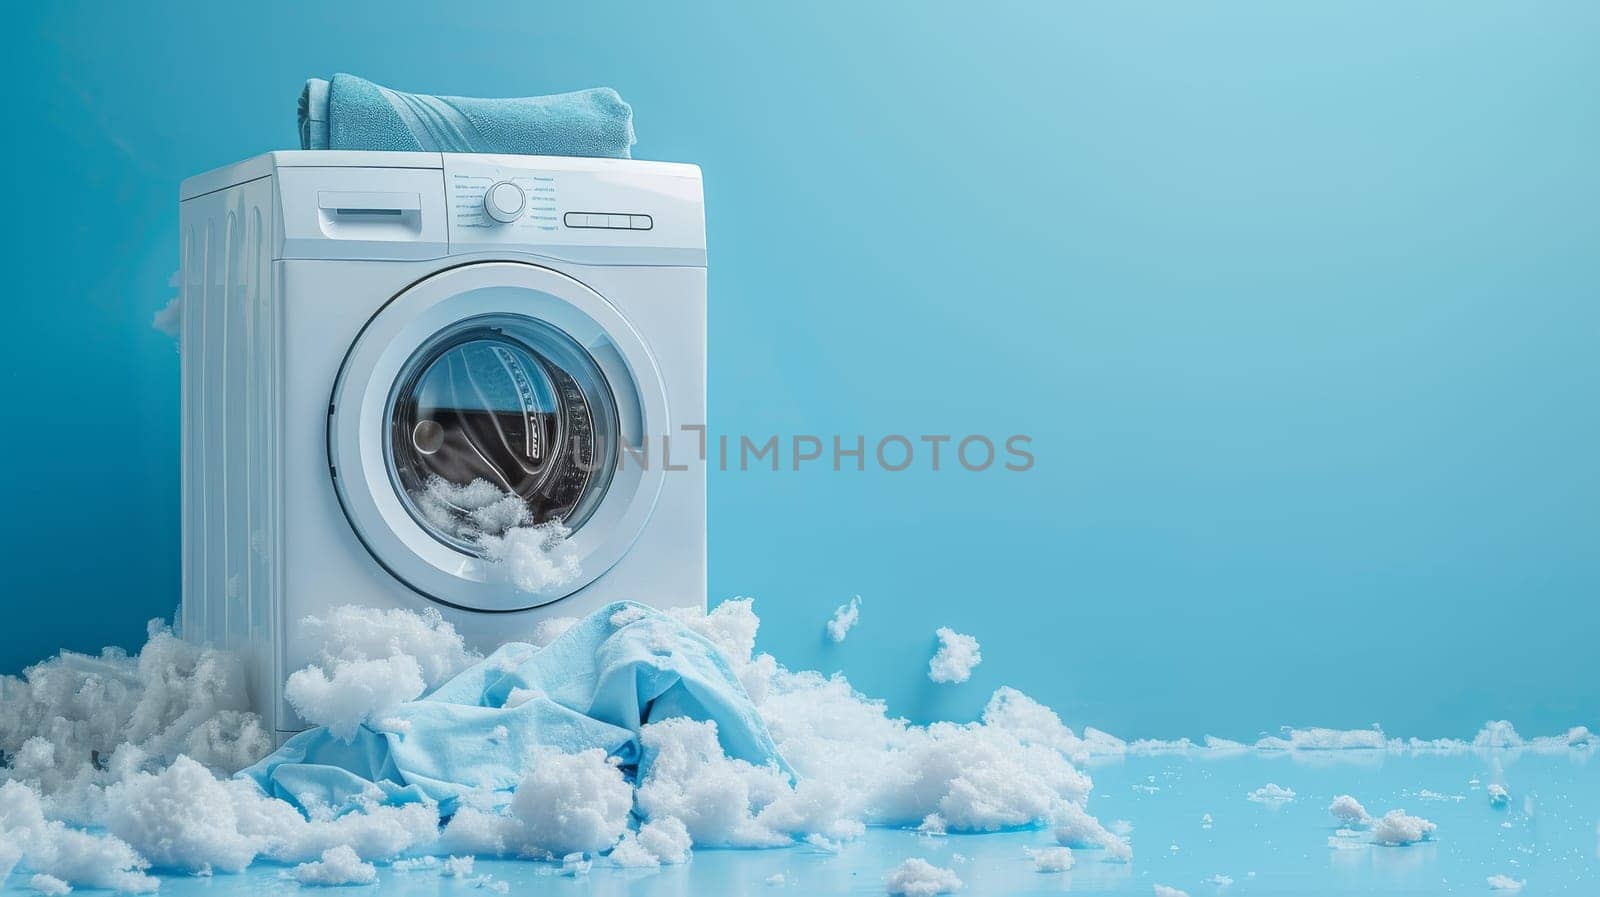 A white washing machine with clothes inside and a blue wall behind it. The clothes are wet and the machine is making a lot of noise